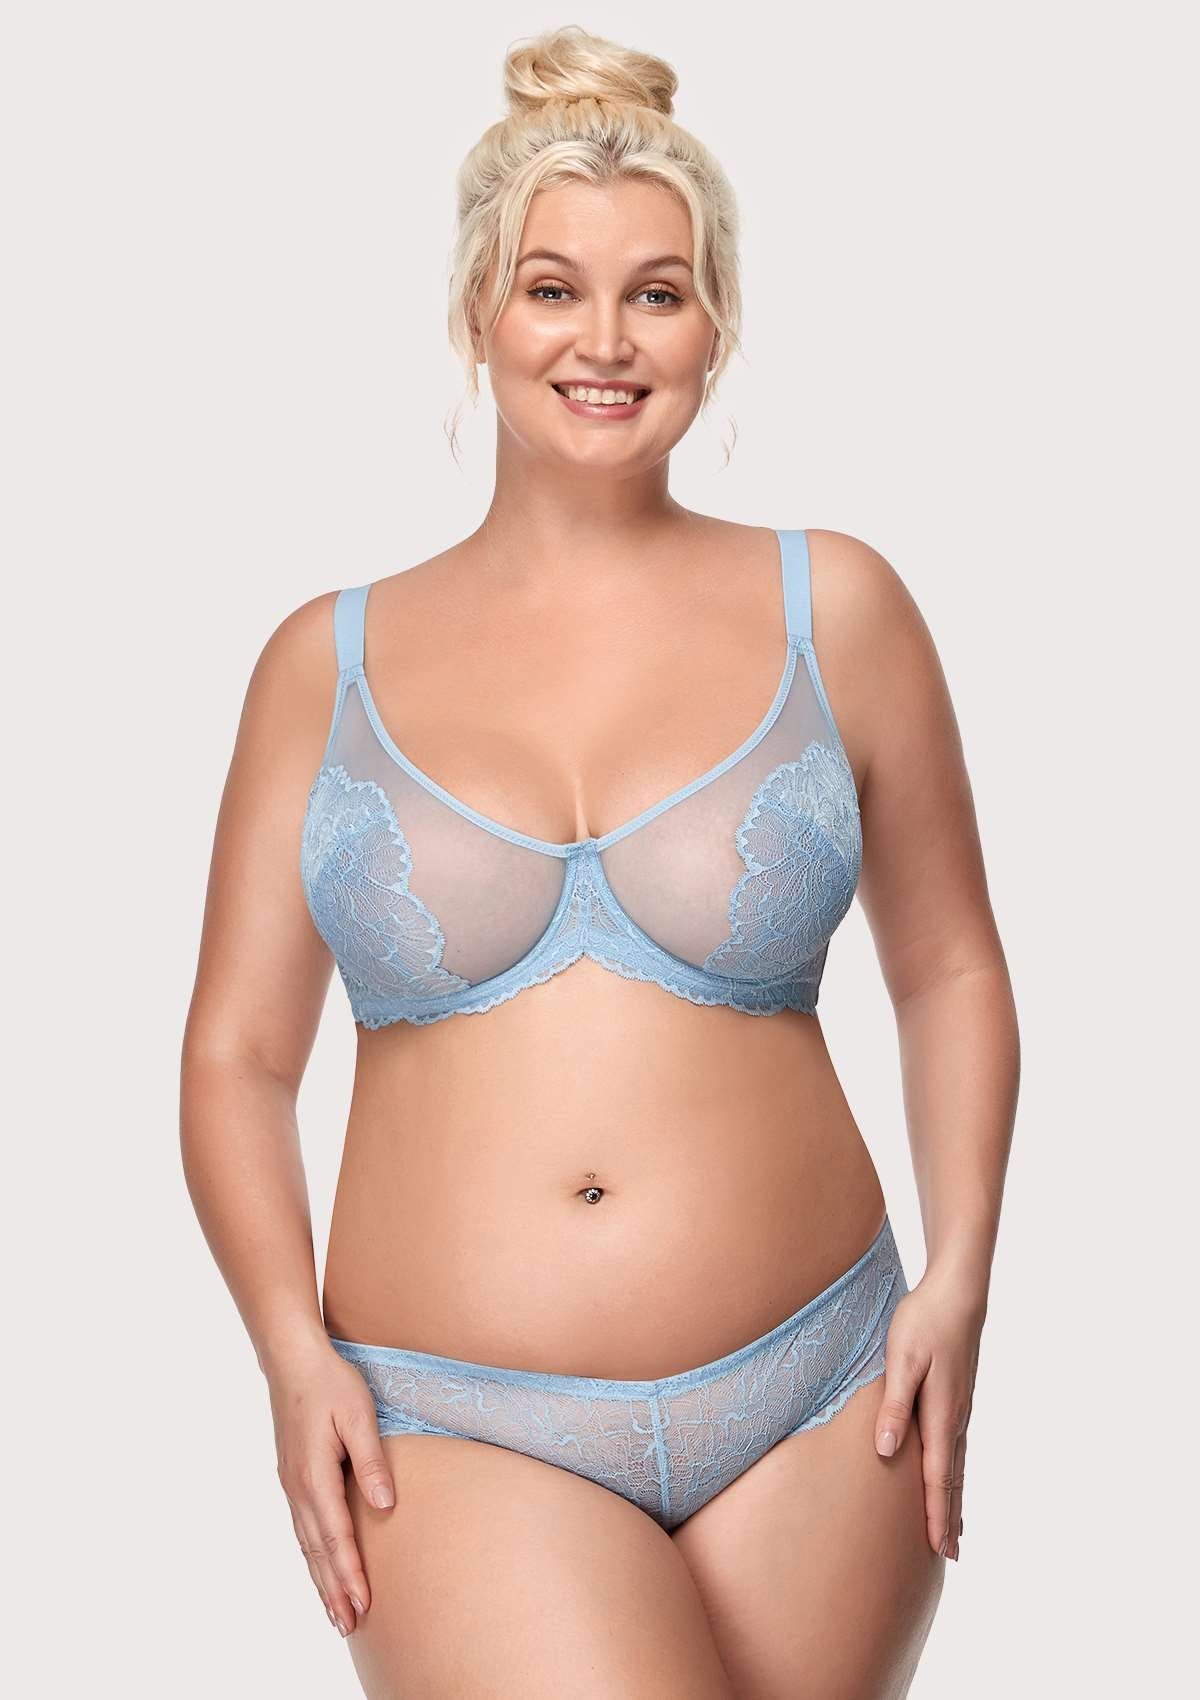 HSIA Blossom Full Coverage Supportive Unlined Underwire Bra Set - Storm Blue / 36 / D